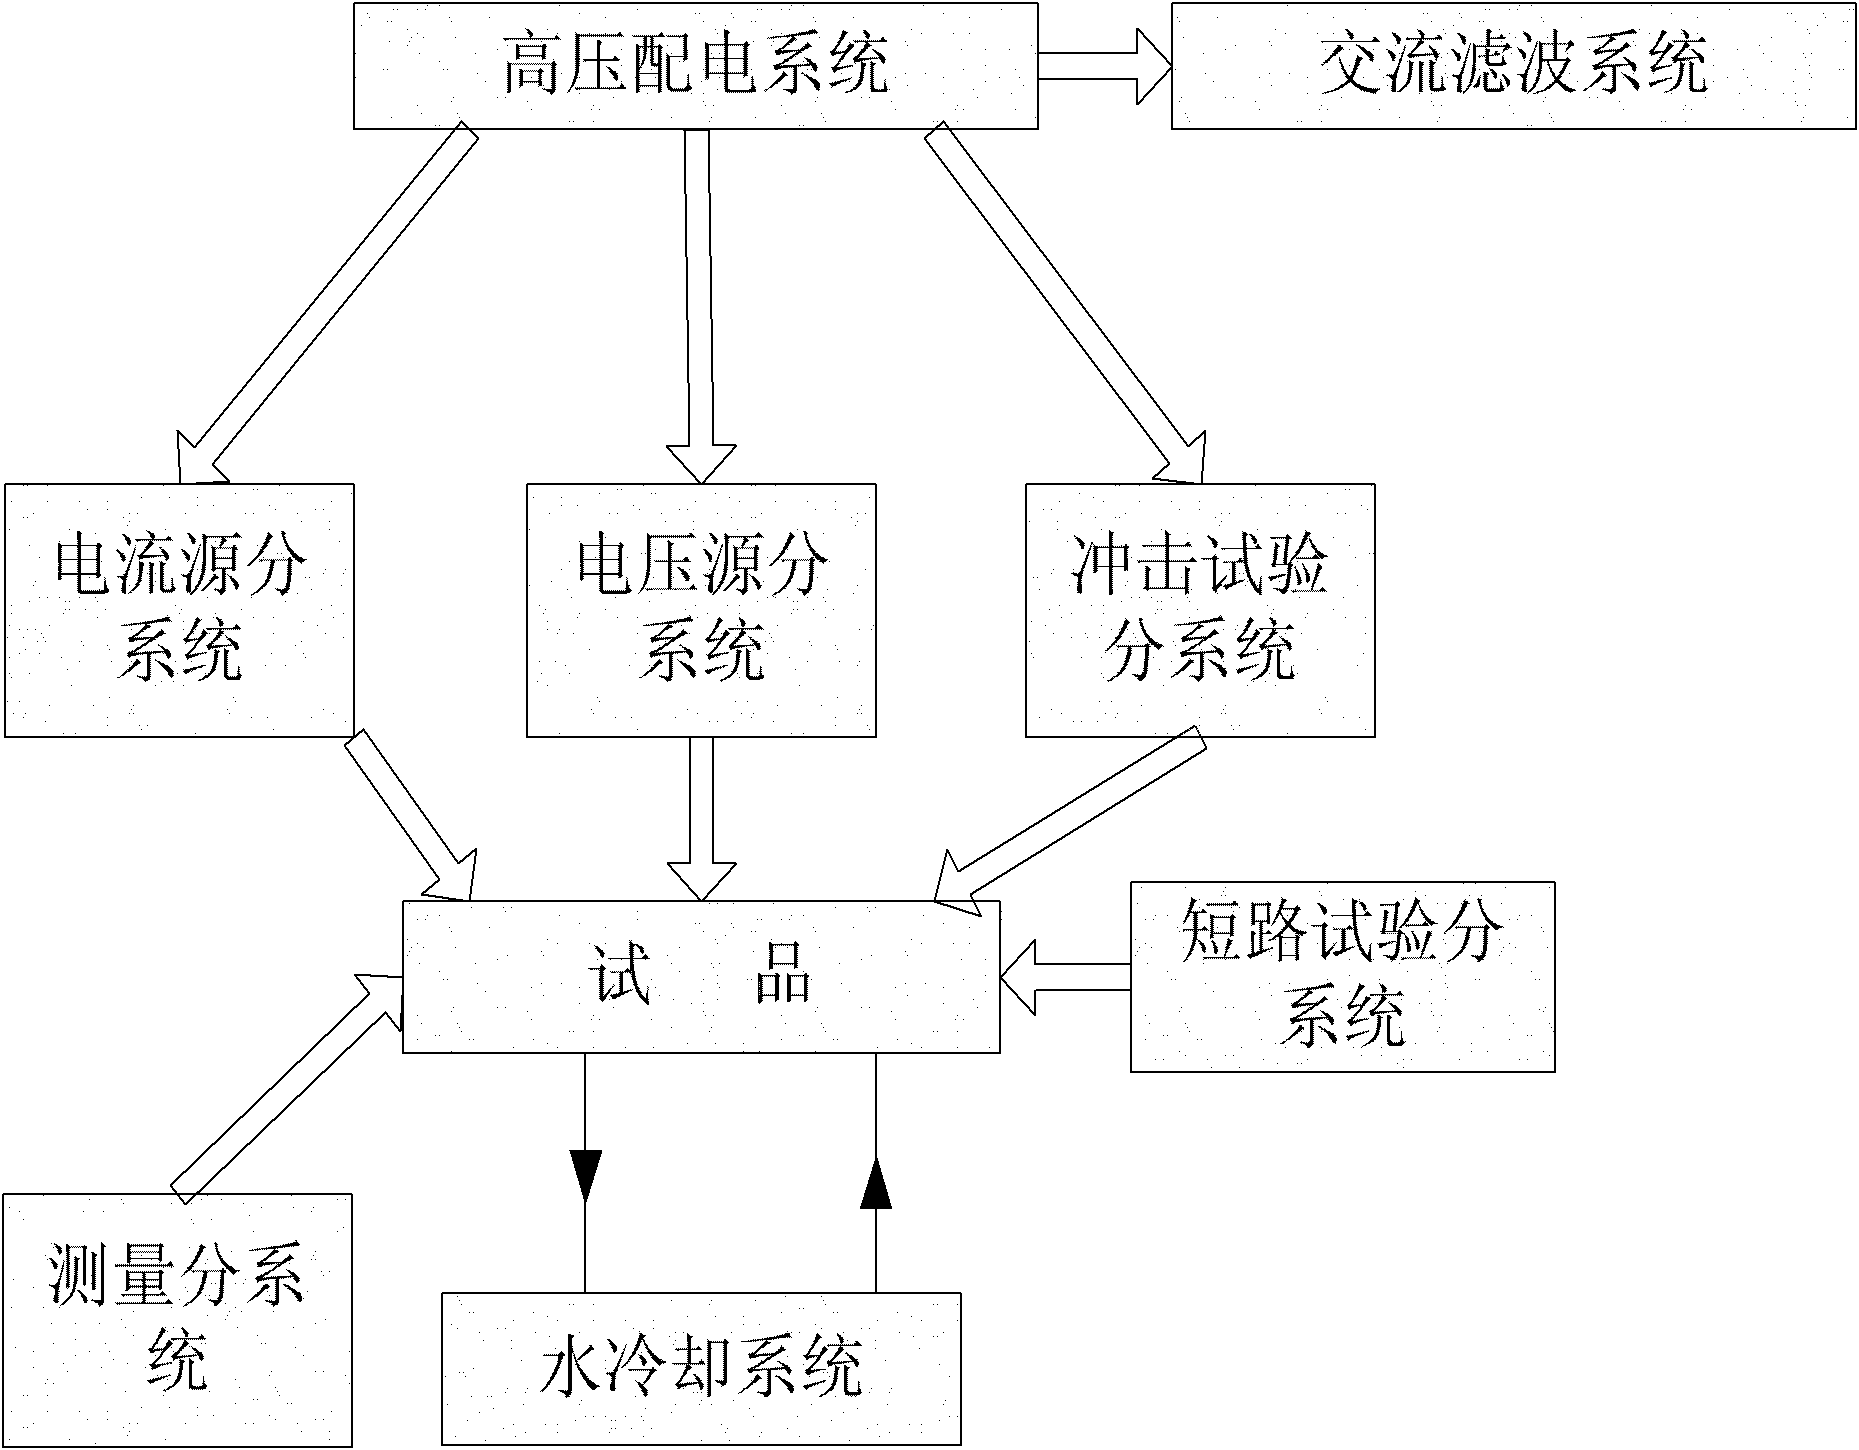 Synthesis loop for running test of converter valve for direct current power transmission project